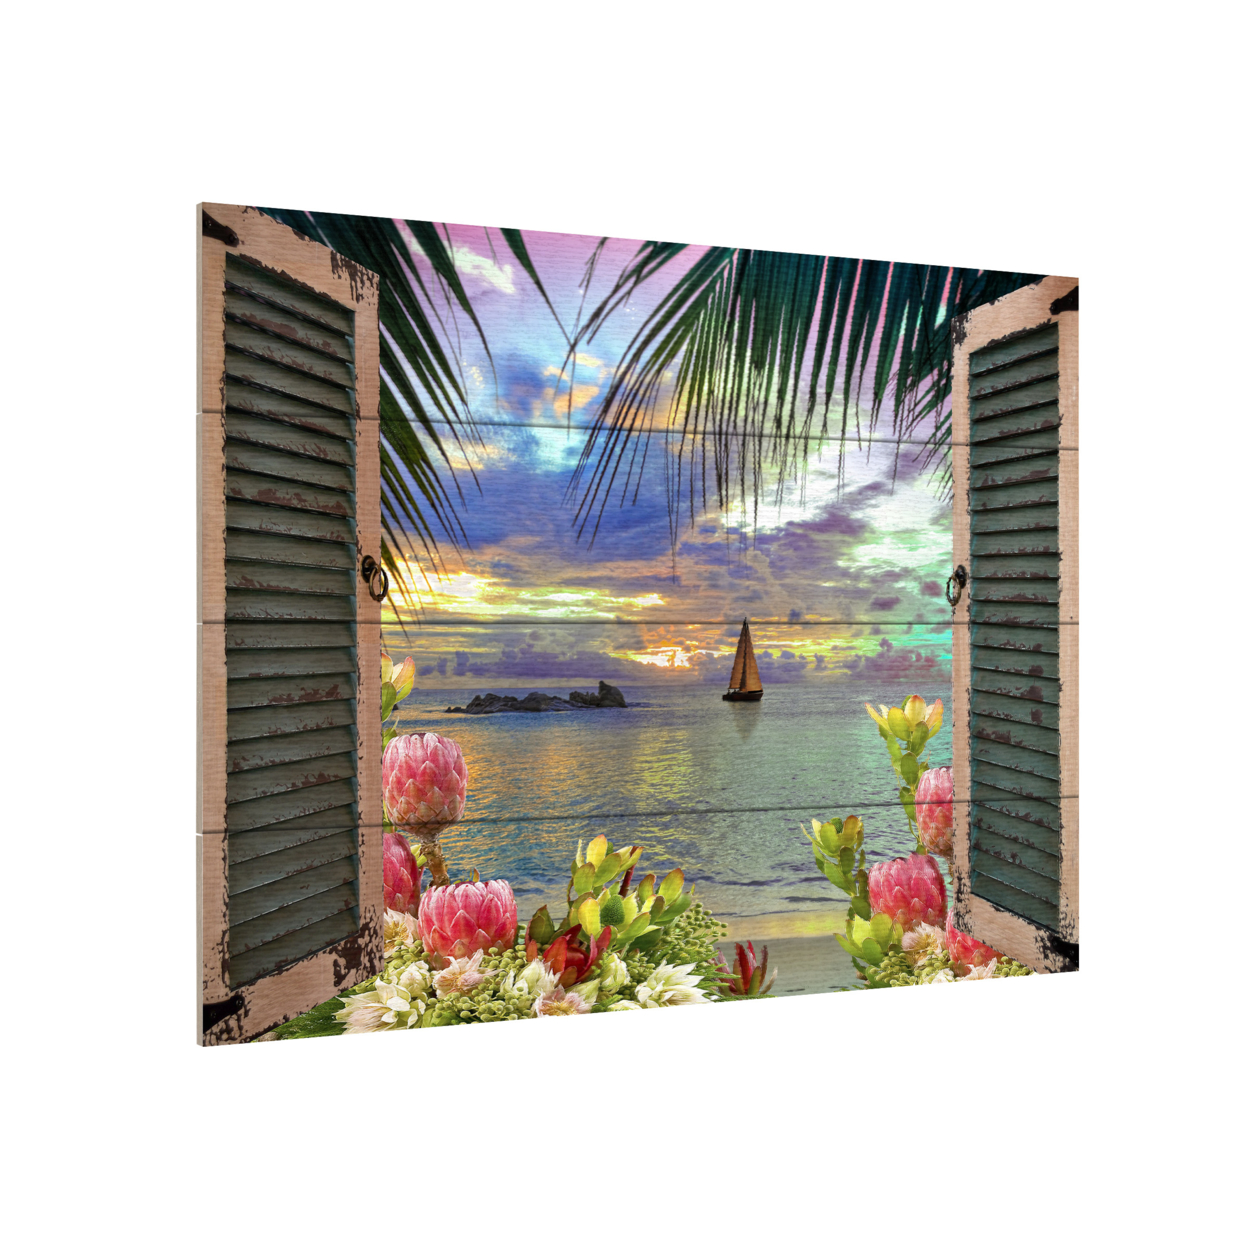 Wall Art 12 X 16 Inches Titled Window To Paradise III Ready To Hang Printed On Wooden Planks